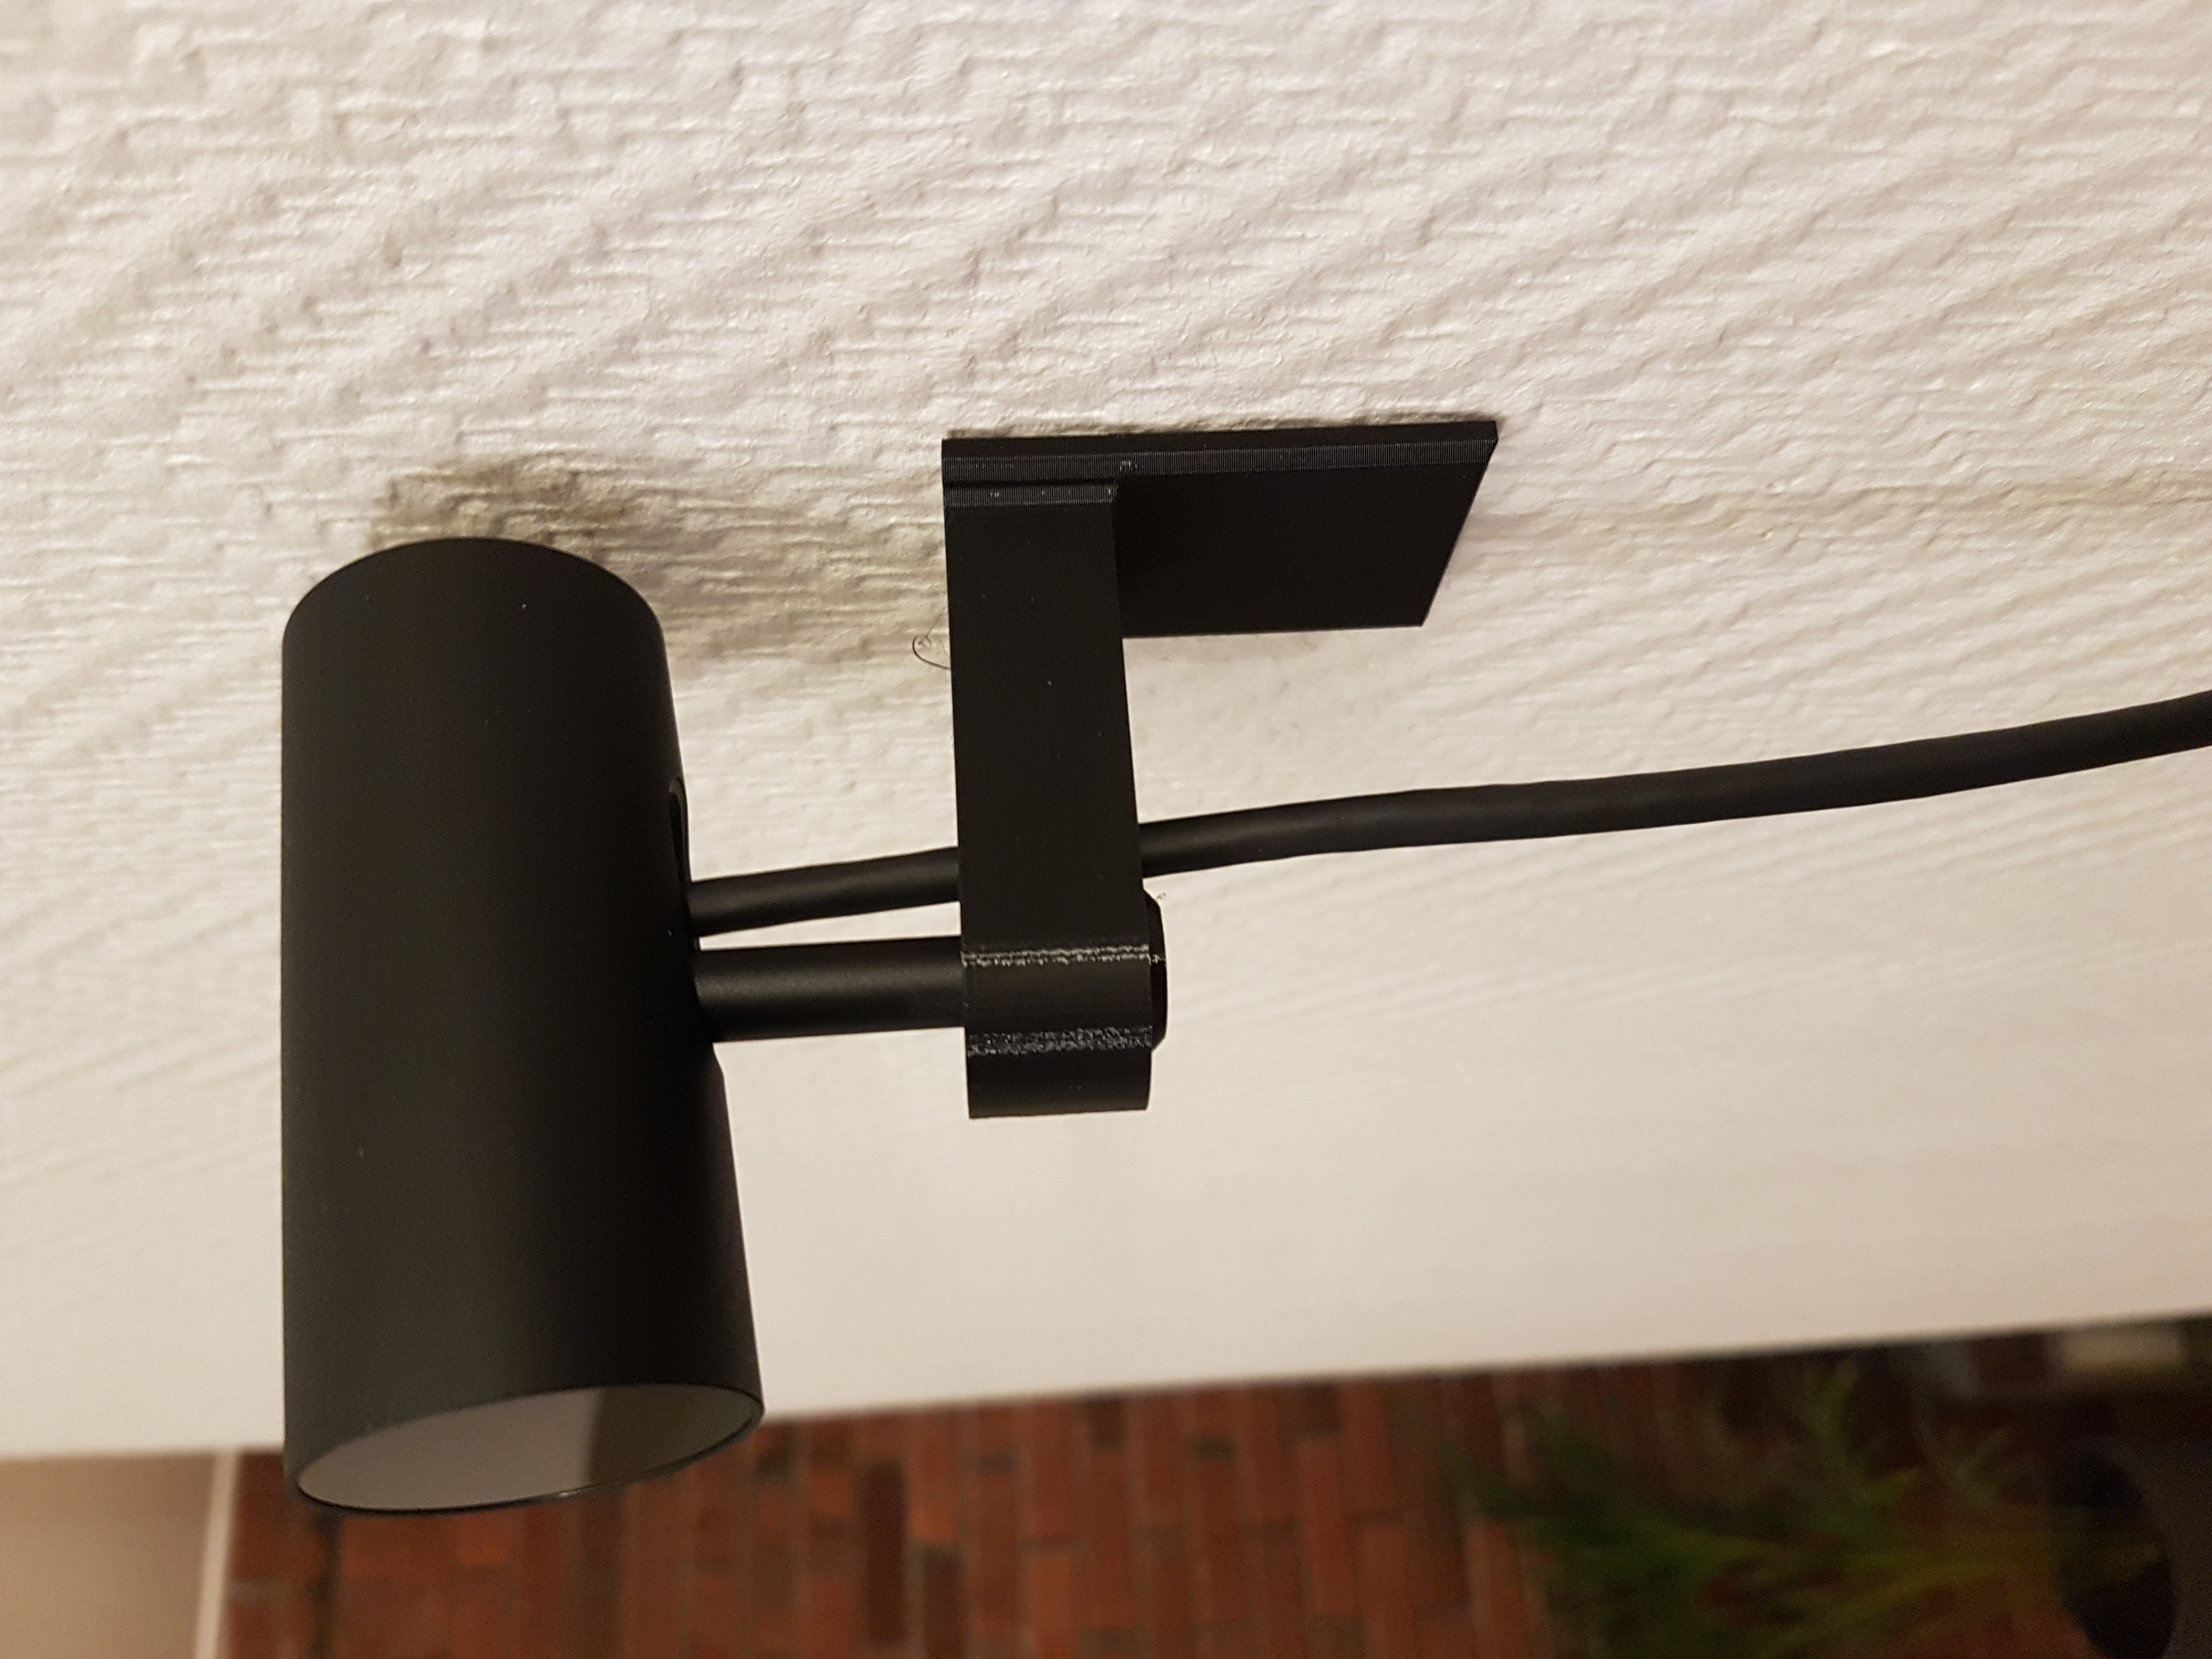 Oculus Rift Camera Wall Mount (Double sided tape)